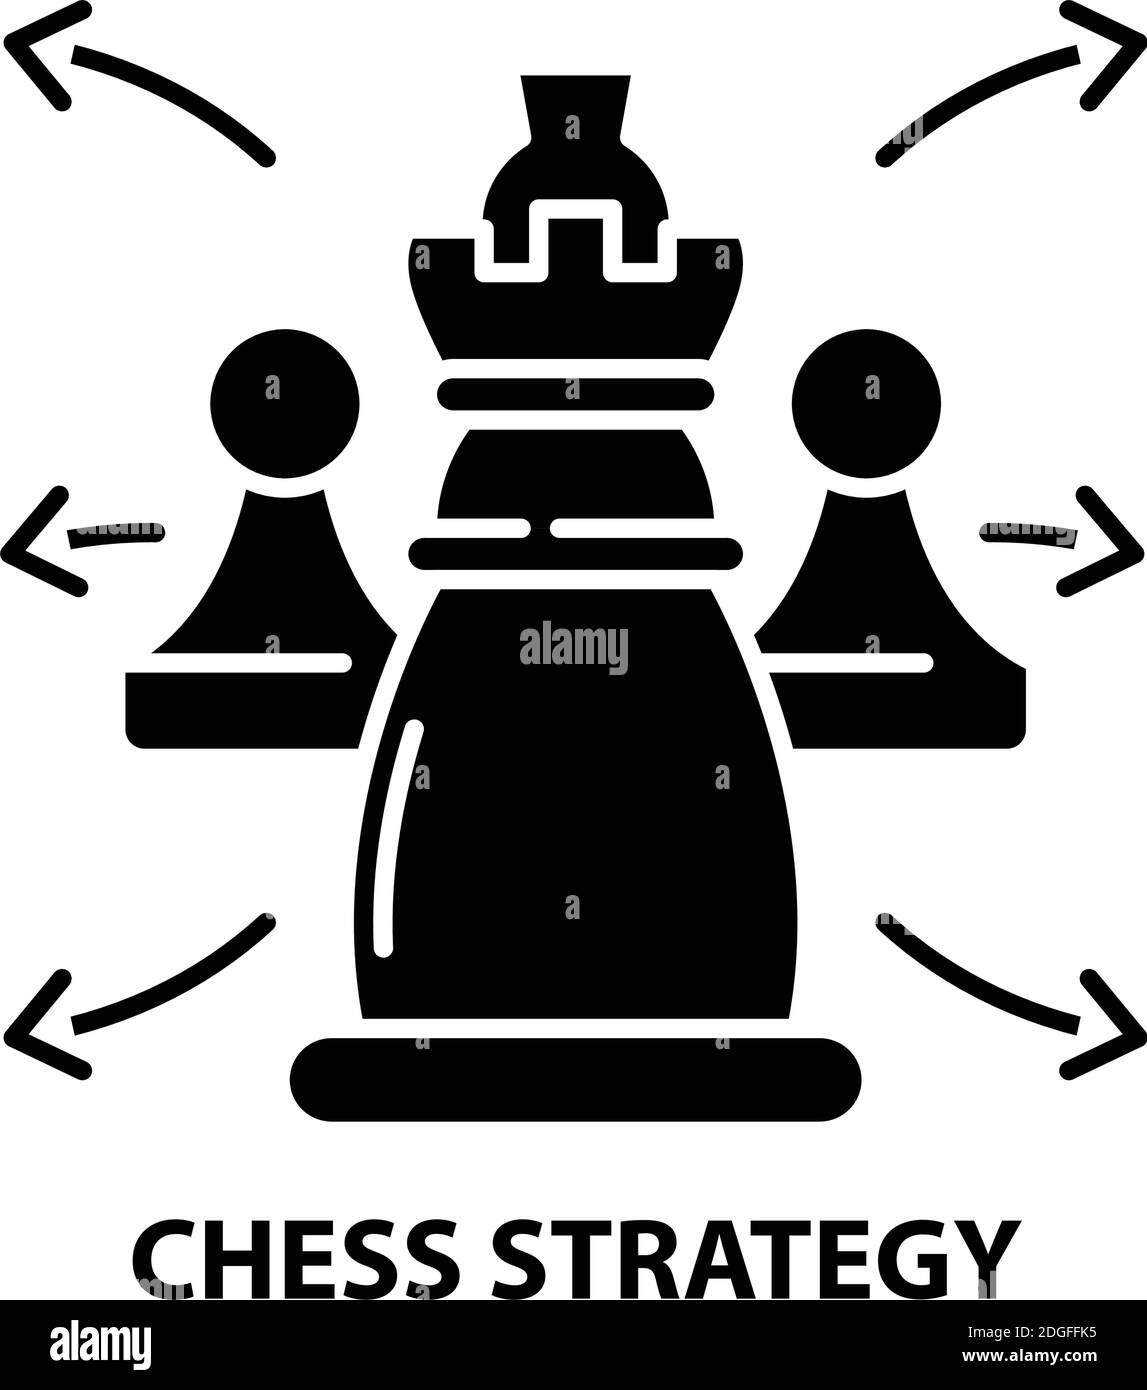 chess strategy icon, black vector sign with editable strokes, concept illustration Stock Vector